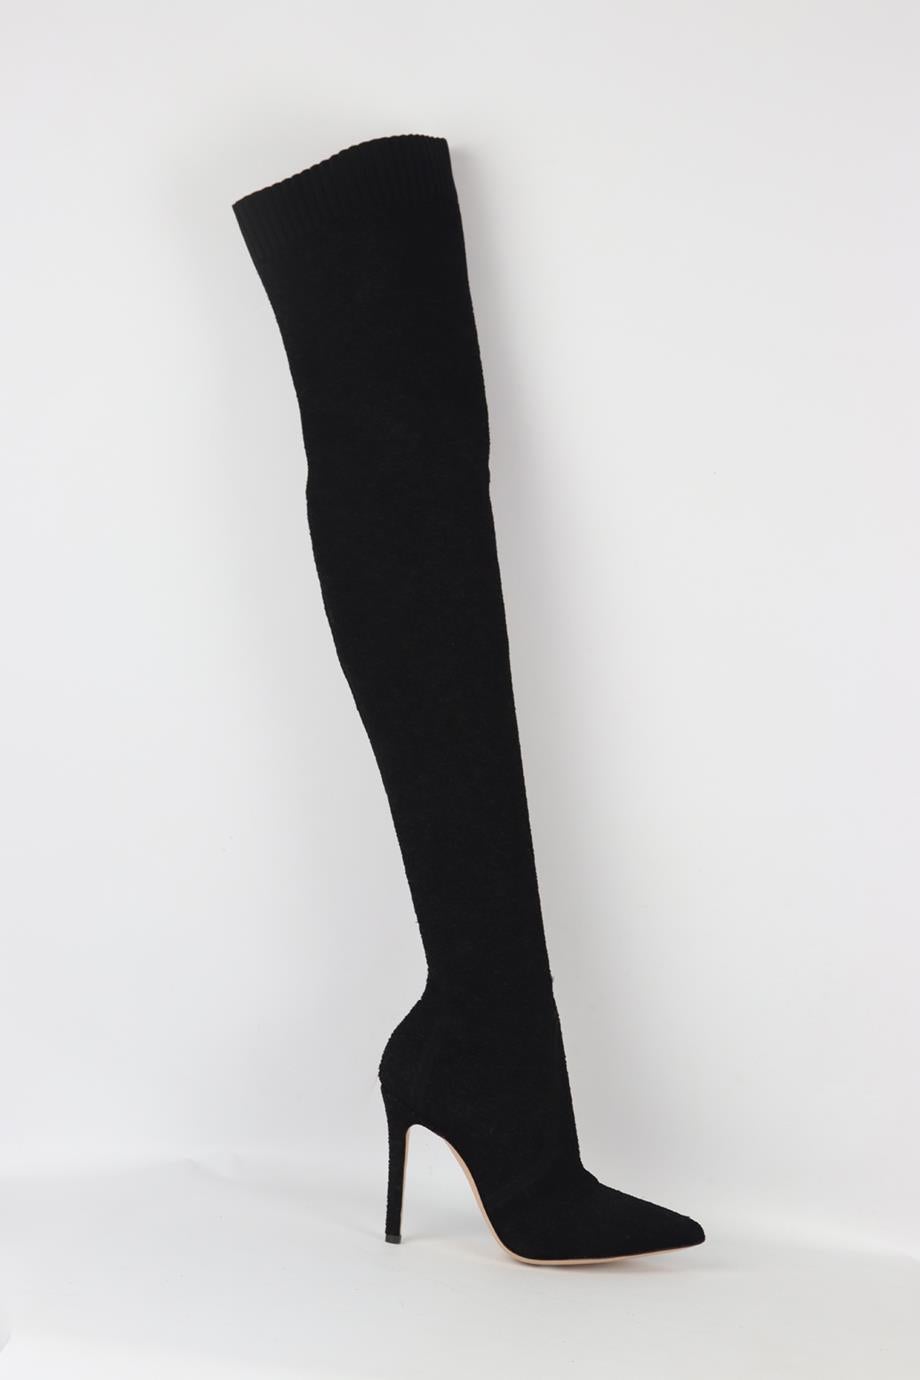 Gianvito Rossi stretch knit over the knee boots. Black. Pull on. Does not come with dustbag or box. Size: EU 38 (UK 5, US 8). Insole: 9.6 in. Heel Height: 3.7 in. Platform: 0.4 in. Shaft: 21.5 in. Thigh: 15.6 in. New without box.